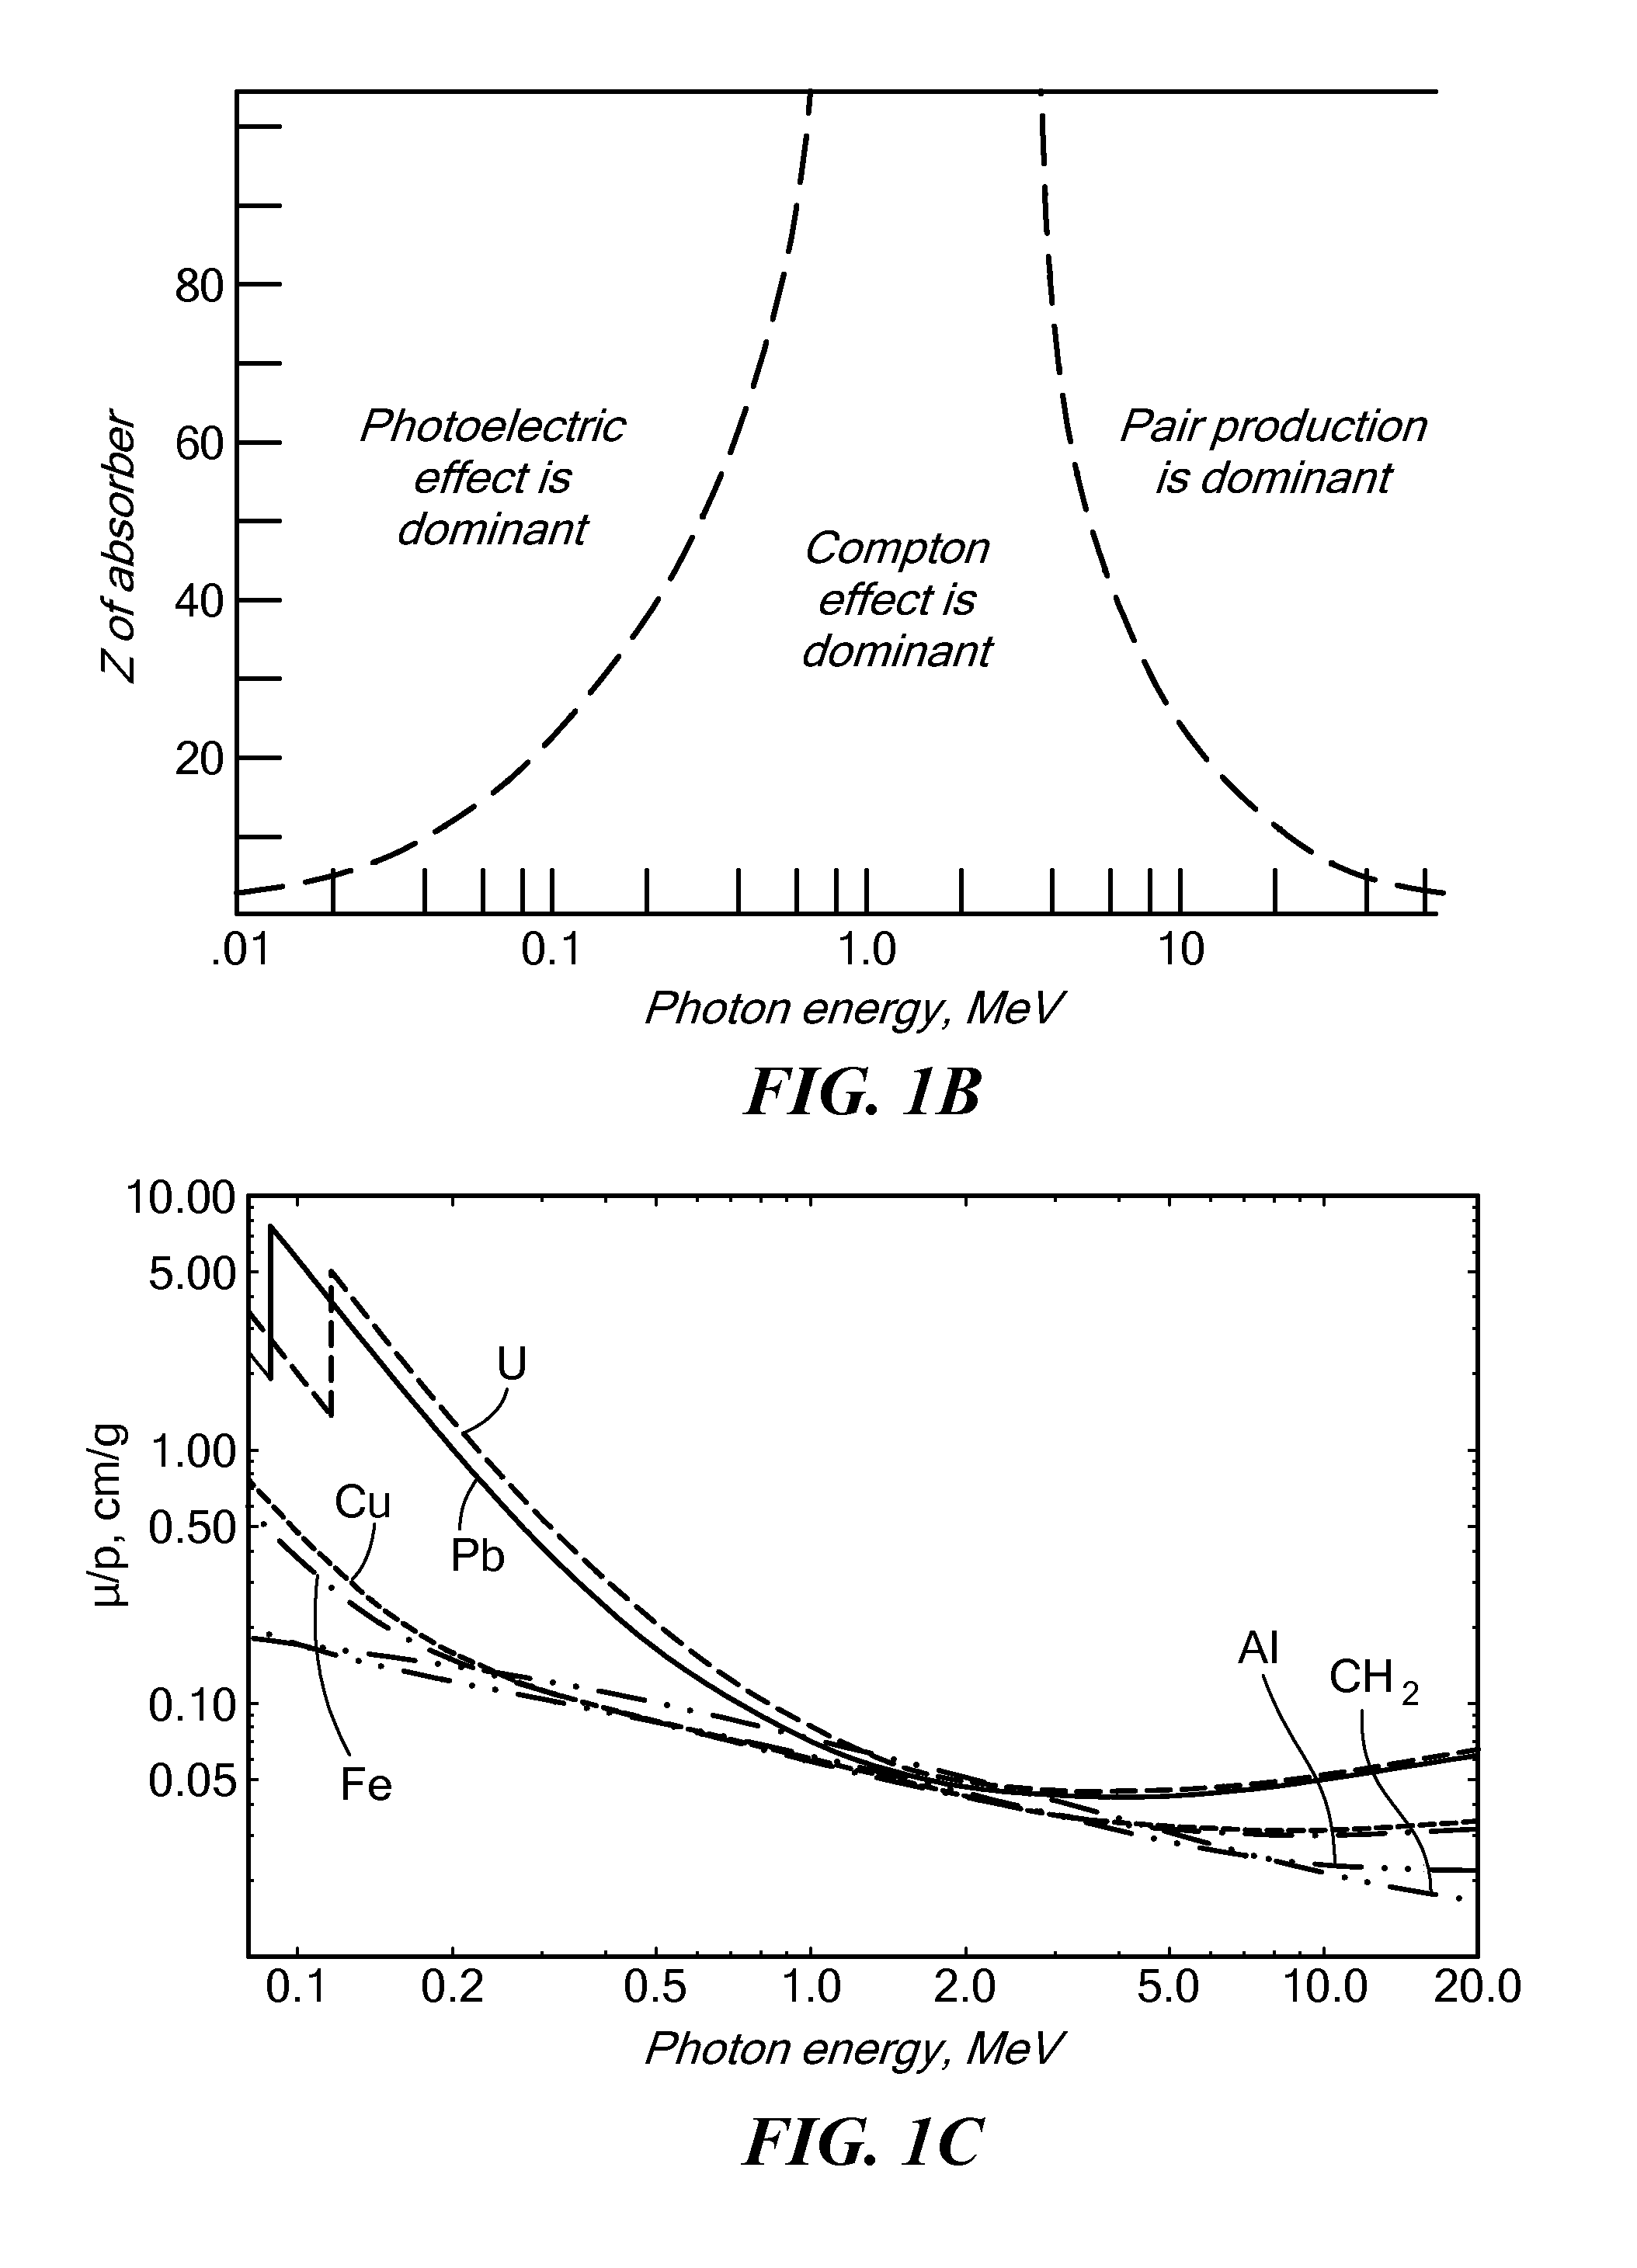 System and Methods for Intrapulse Multi-energy and Adaptive Multi-energy X-ray Cargo Inspection